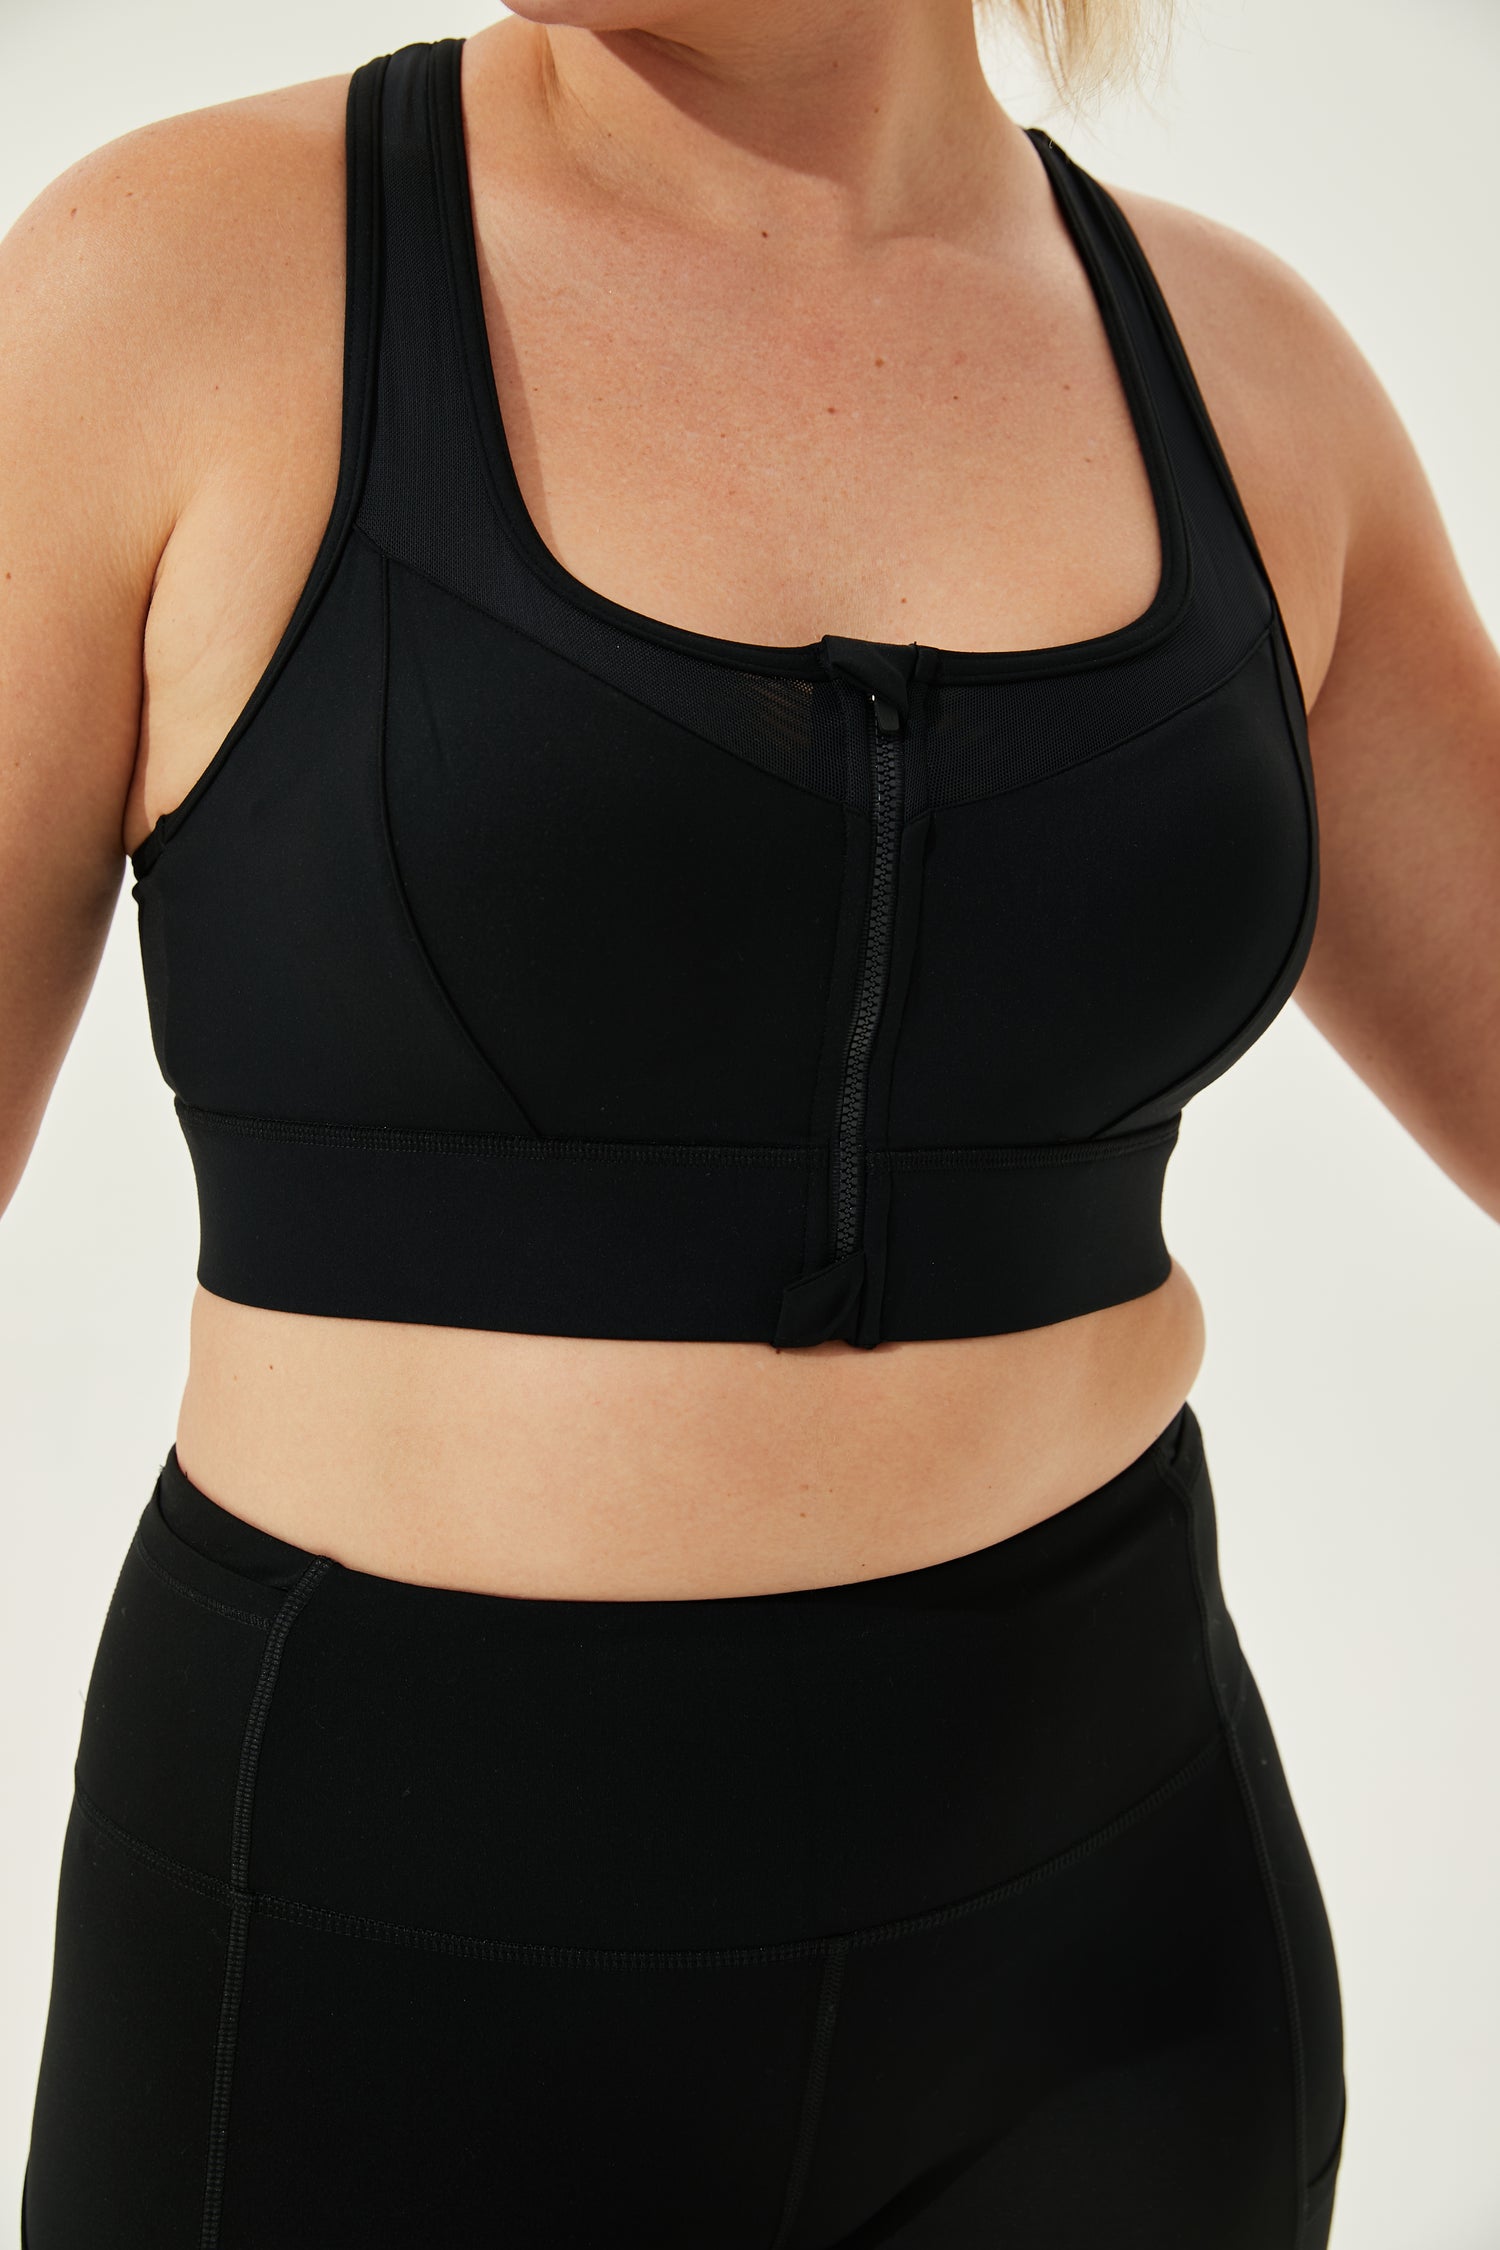 High Impact Ace Sports Bra With Moulded Cups & Front Zip